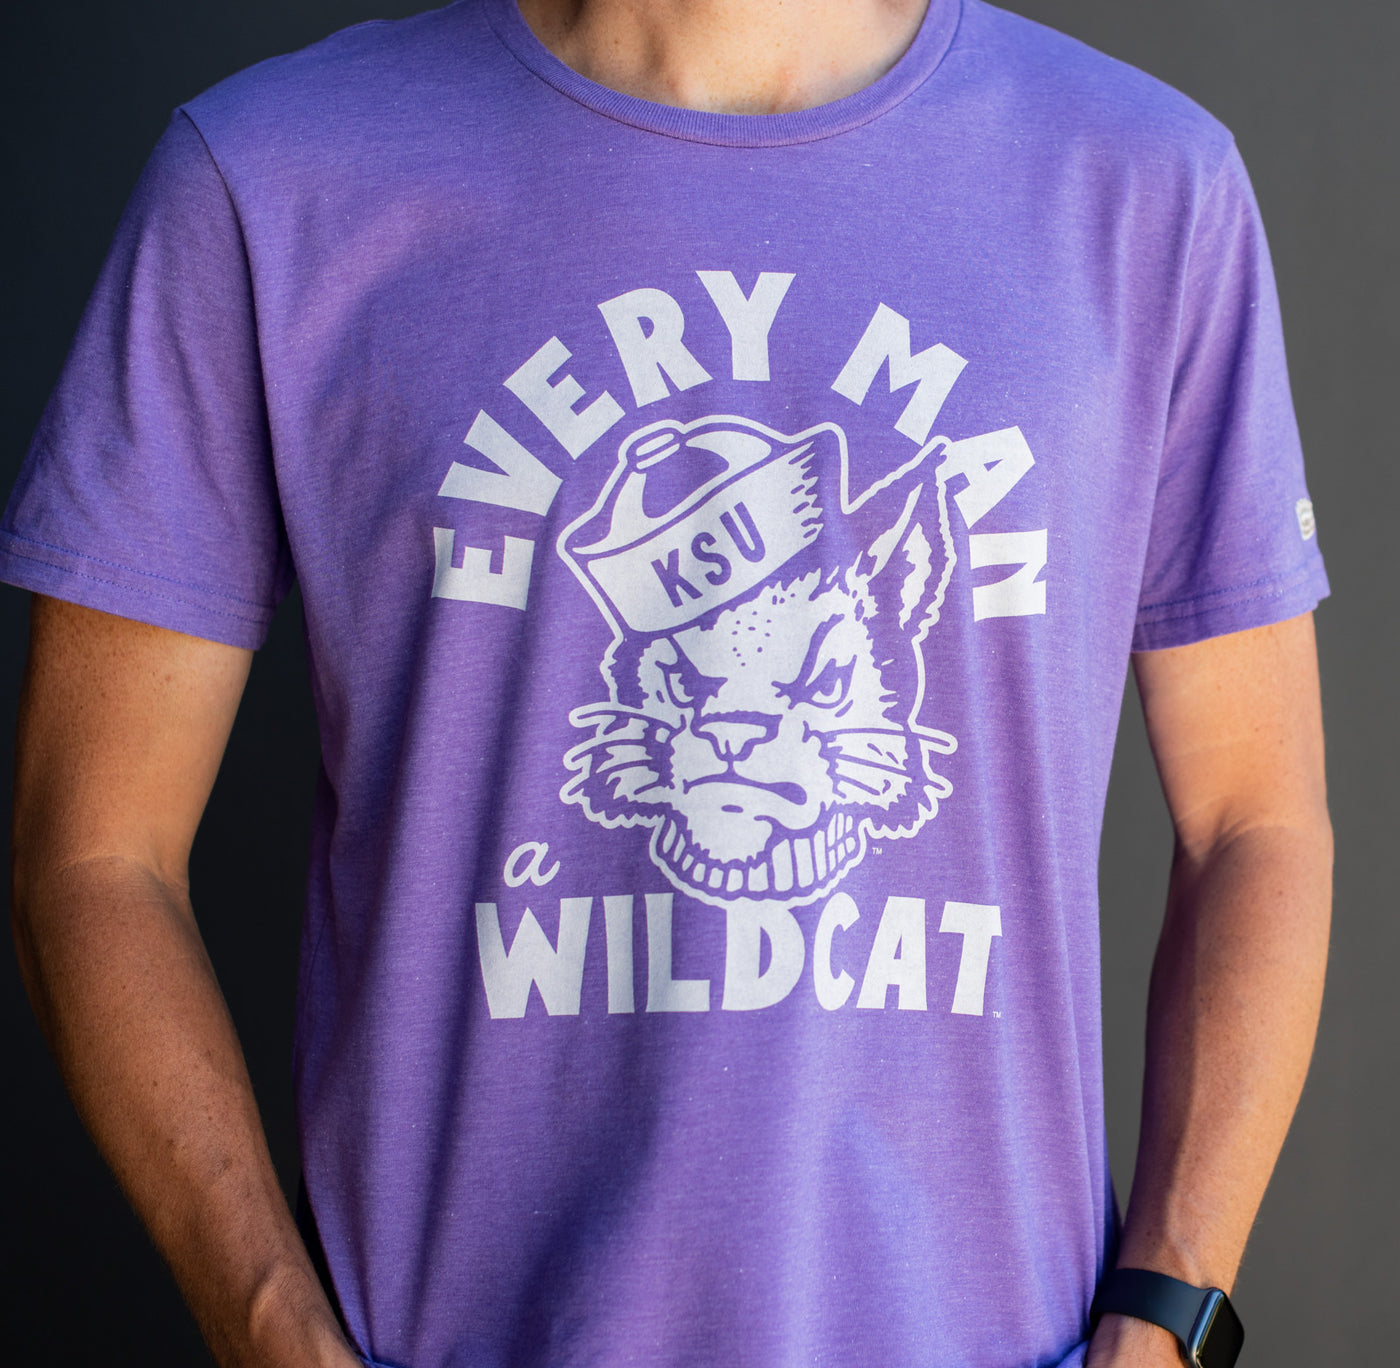 “Every Man a Wildcat” Vintage K-State Tee